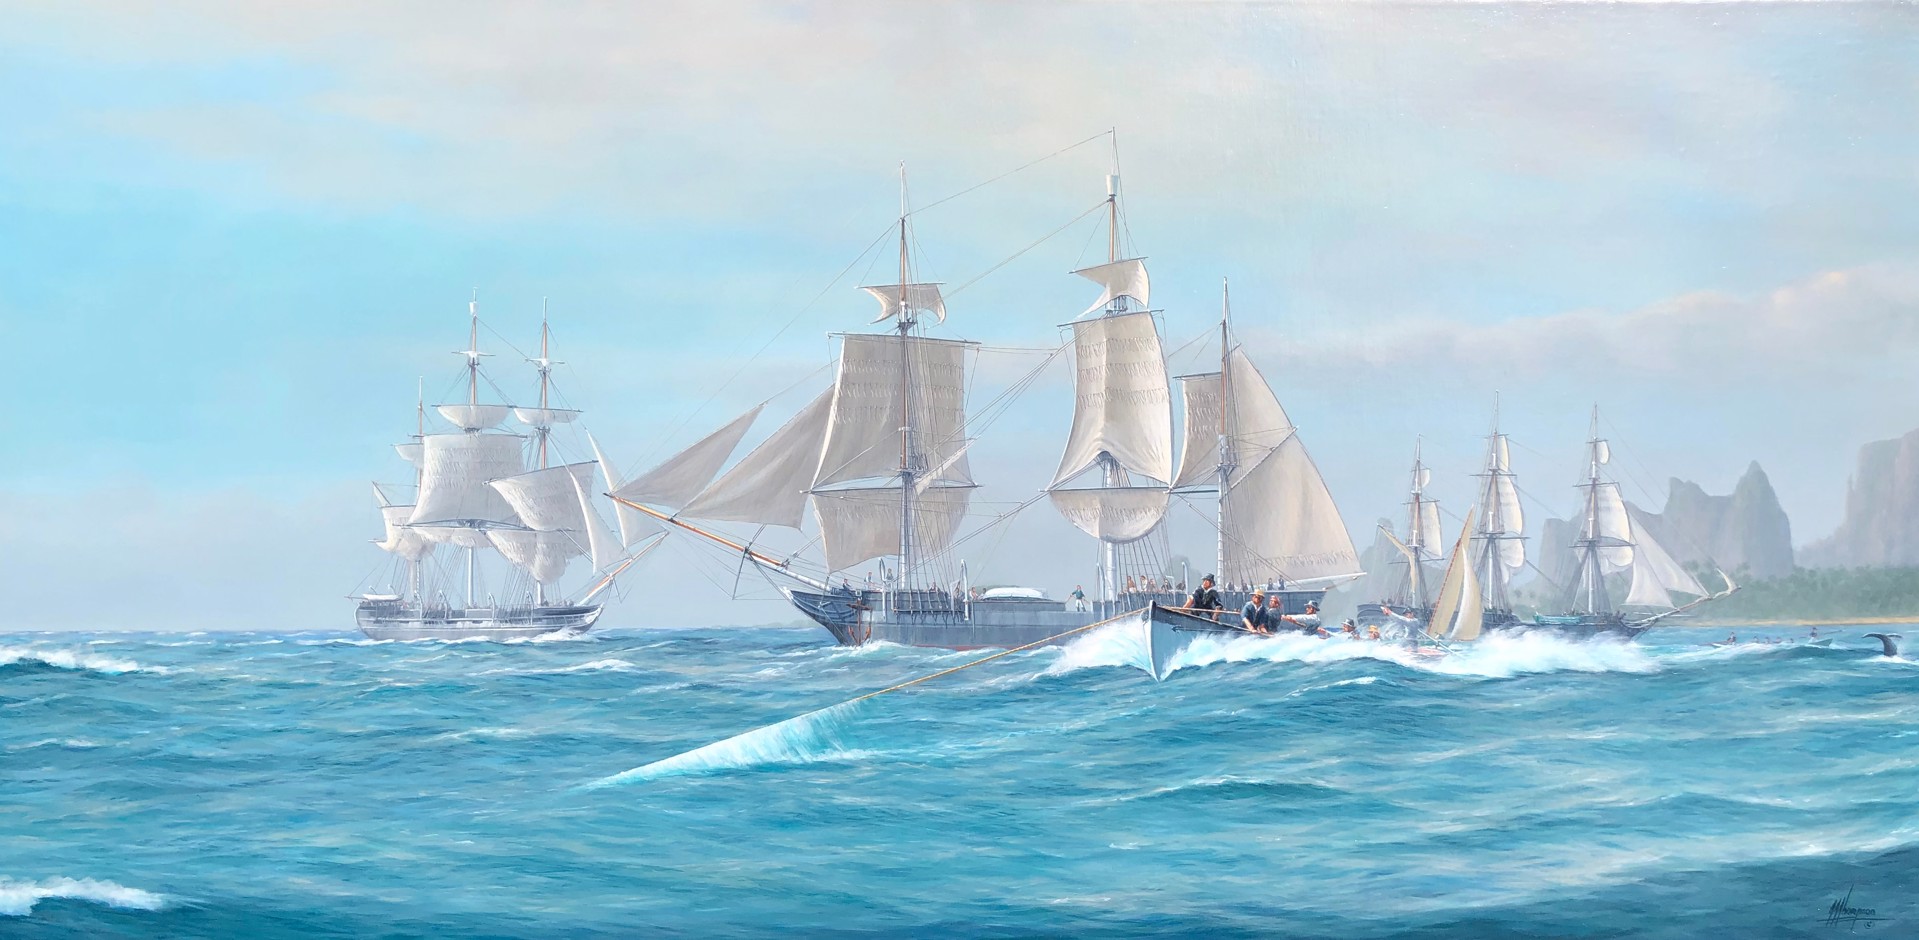 Early Nantucket Whaling in the South Sea by Tim Thompson